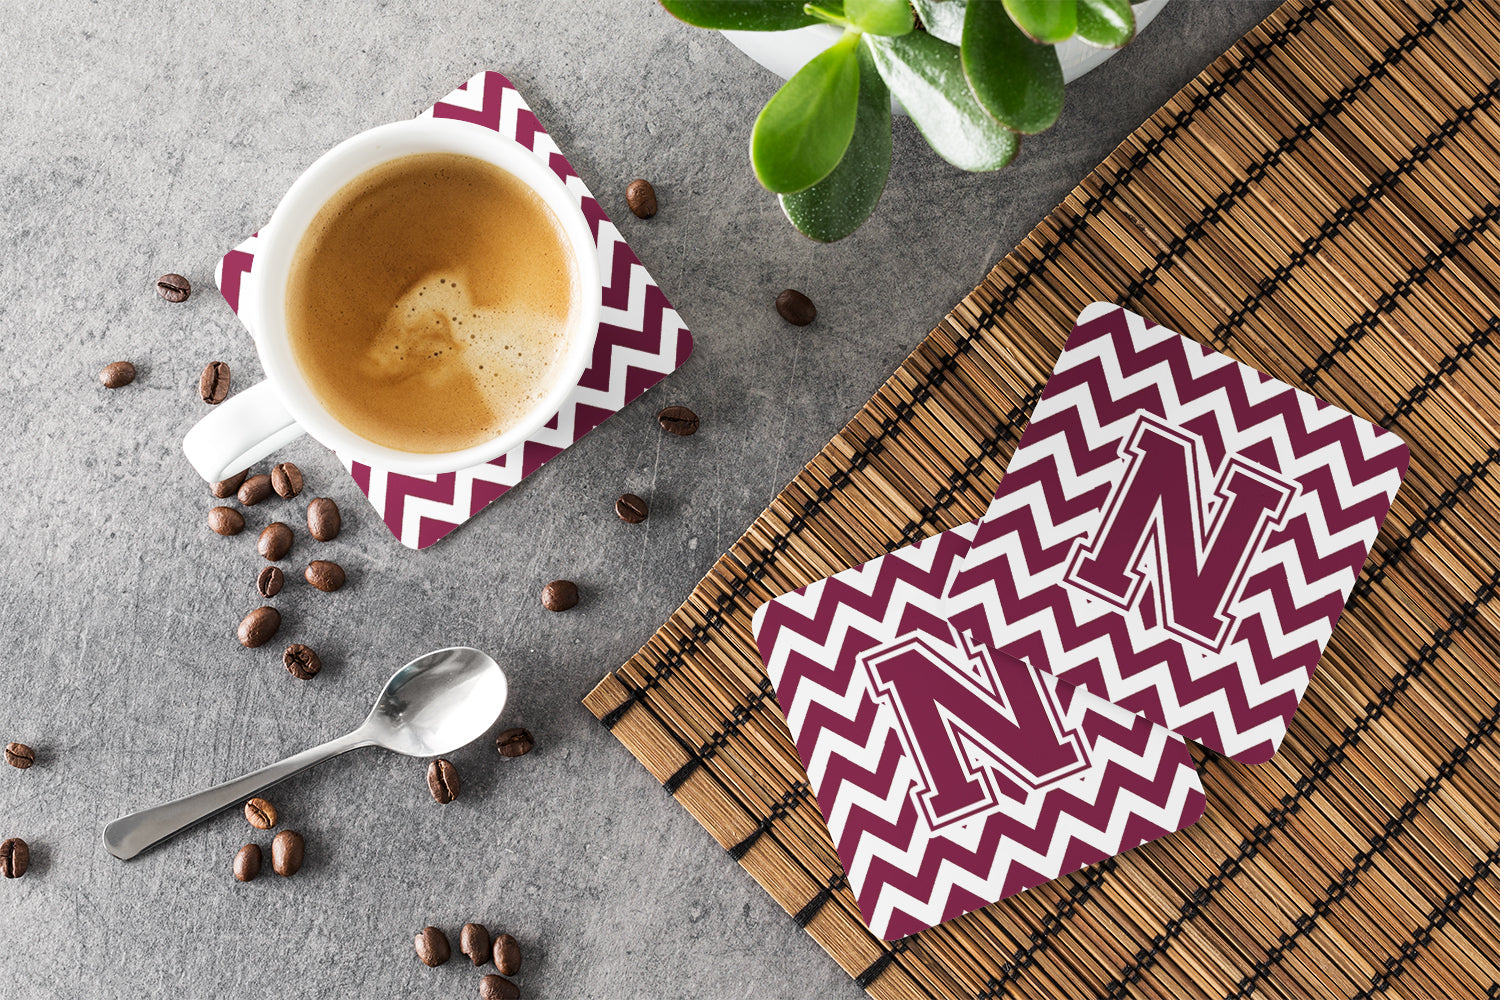 Letter N Chevron Maroon and White  Foam Coaster Set of 4 CJ1051-NFC - the-store.com